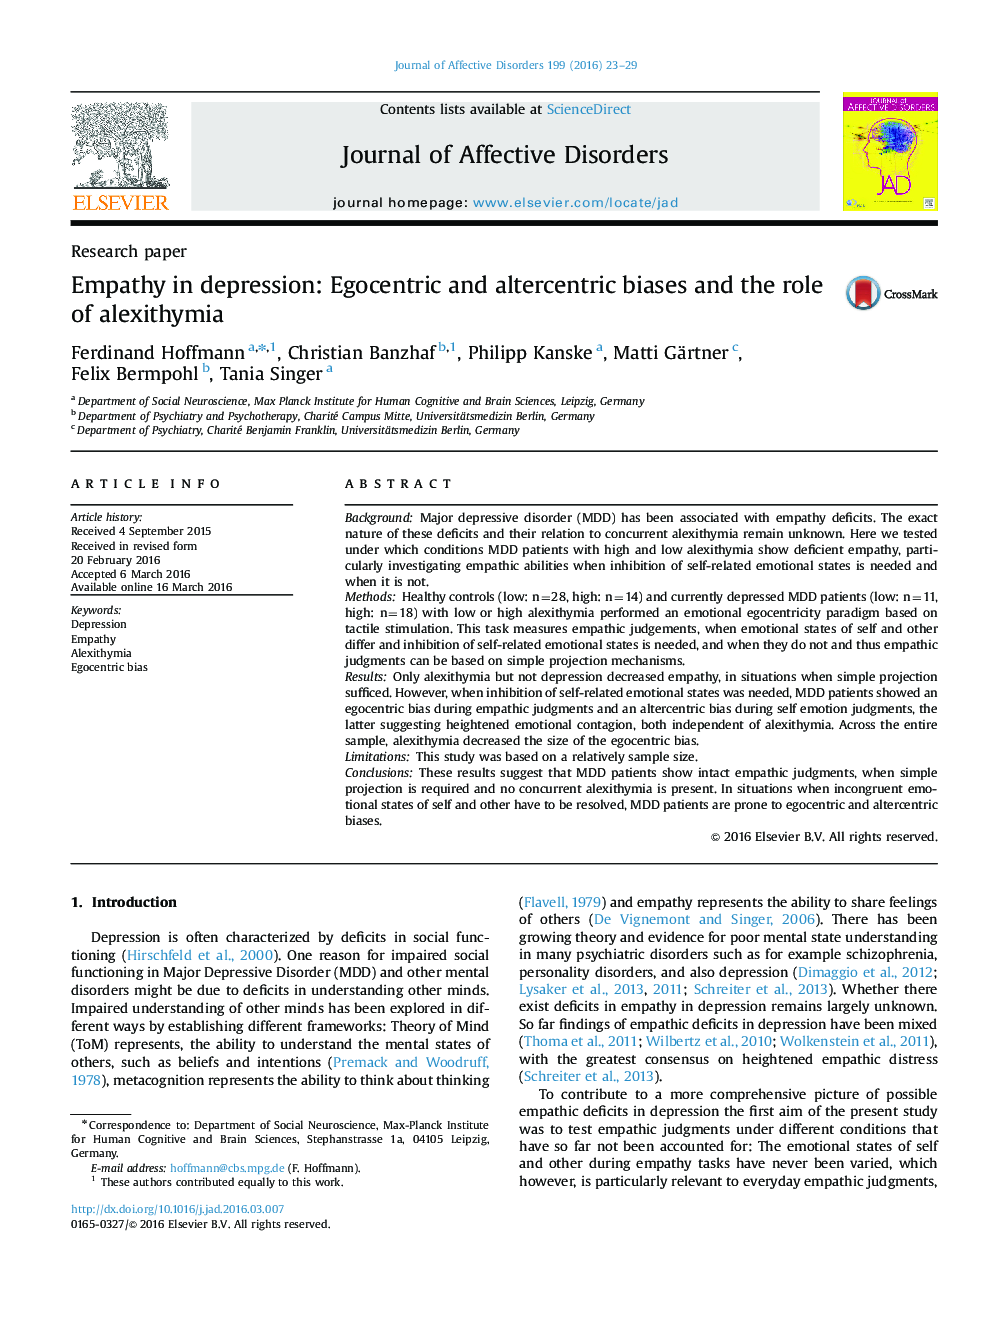 Empathy in depression: Egocentric and altercentric biases and the role of alexithymia